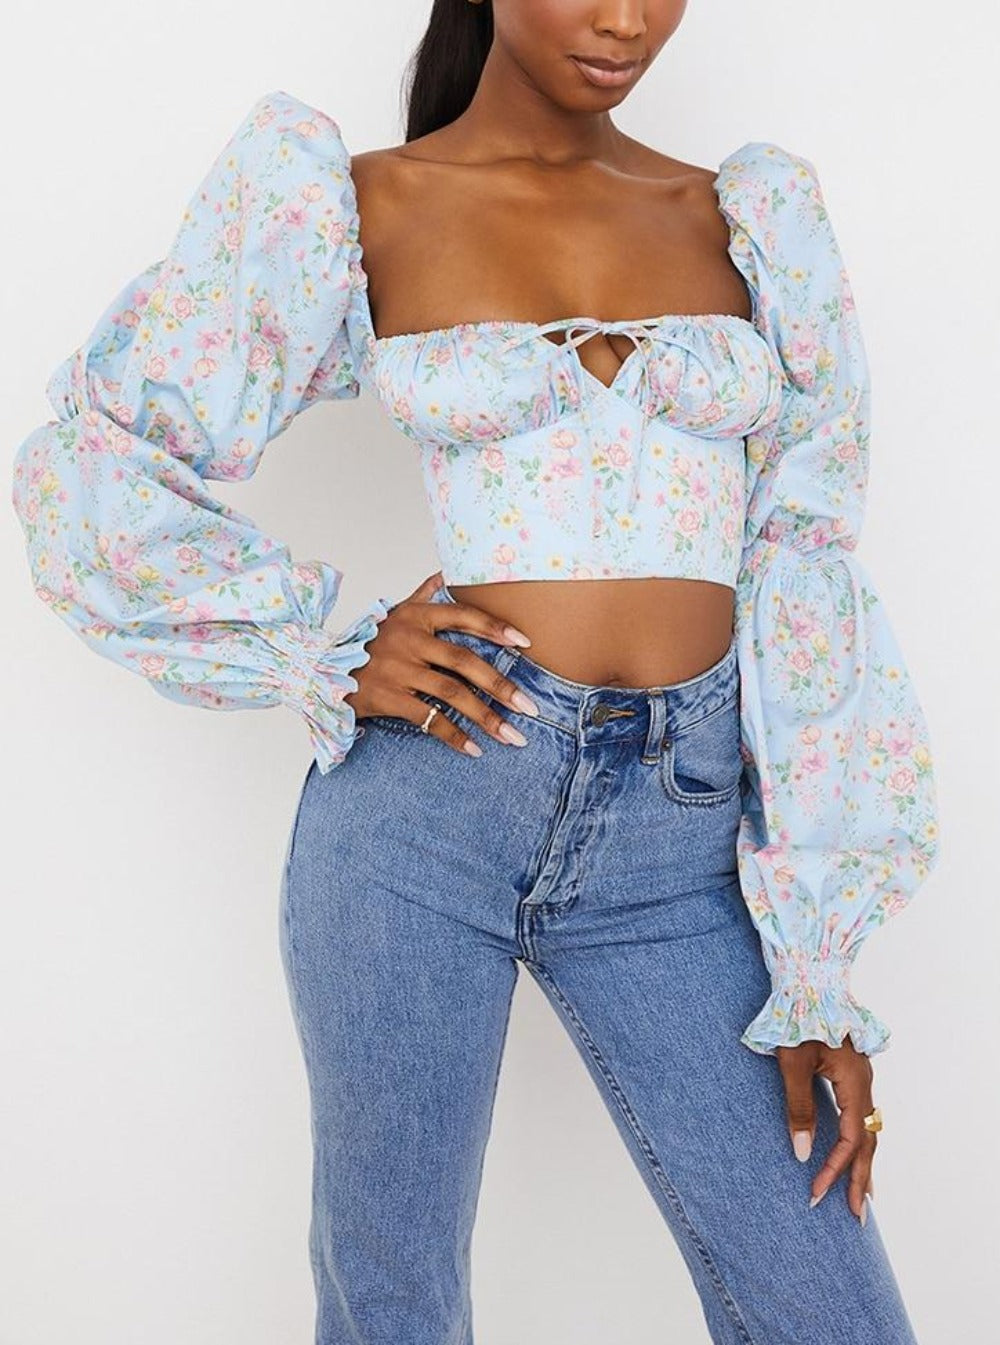 Everyday.Discount buy women's croptop tiktok facebook,summer floral boho elastic fitted bardot bust longsleeves ruched croptop pinterest corsets with sleeves for women moda ruched floral sleeves instagram womens clothing wear with skirts heels leggings pant trousers various sizes xxl xs and colors boutique everyday.discount everyday free.shipping 